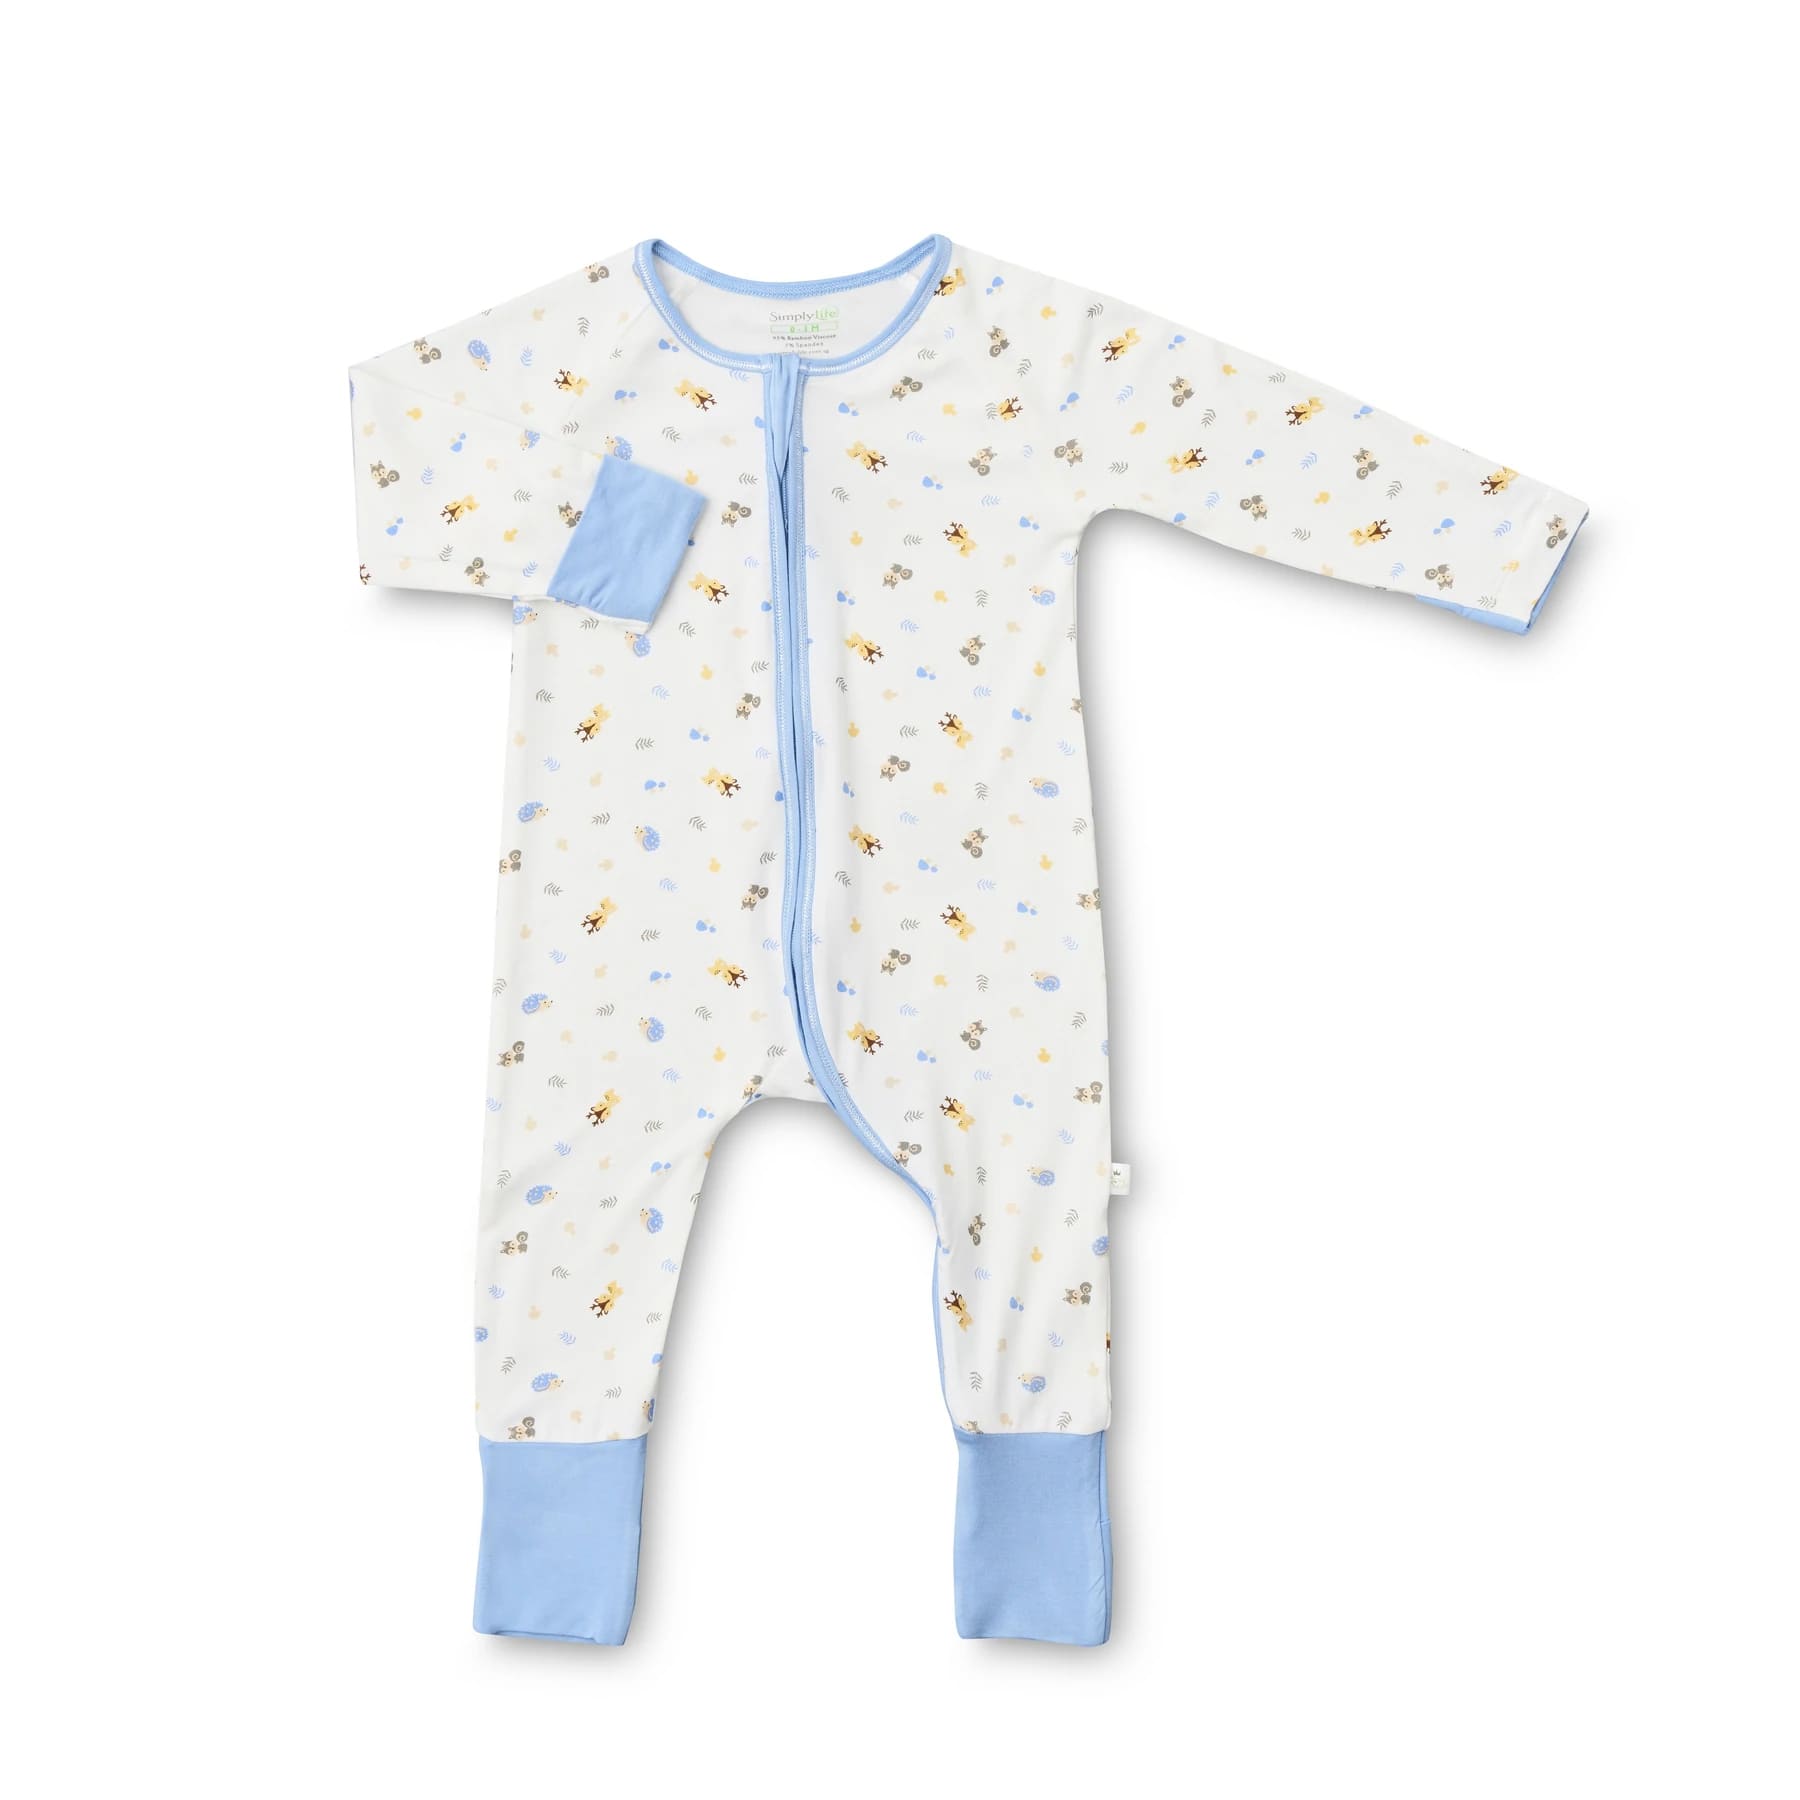 Simply Life Bamboo Sleepsuits Long sleeved Zipper w/folded mittens & footies - Cute Animals (SLWR-39CA)